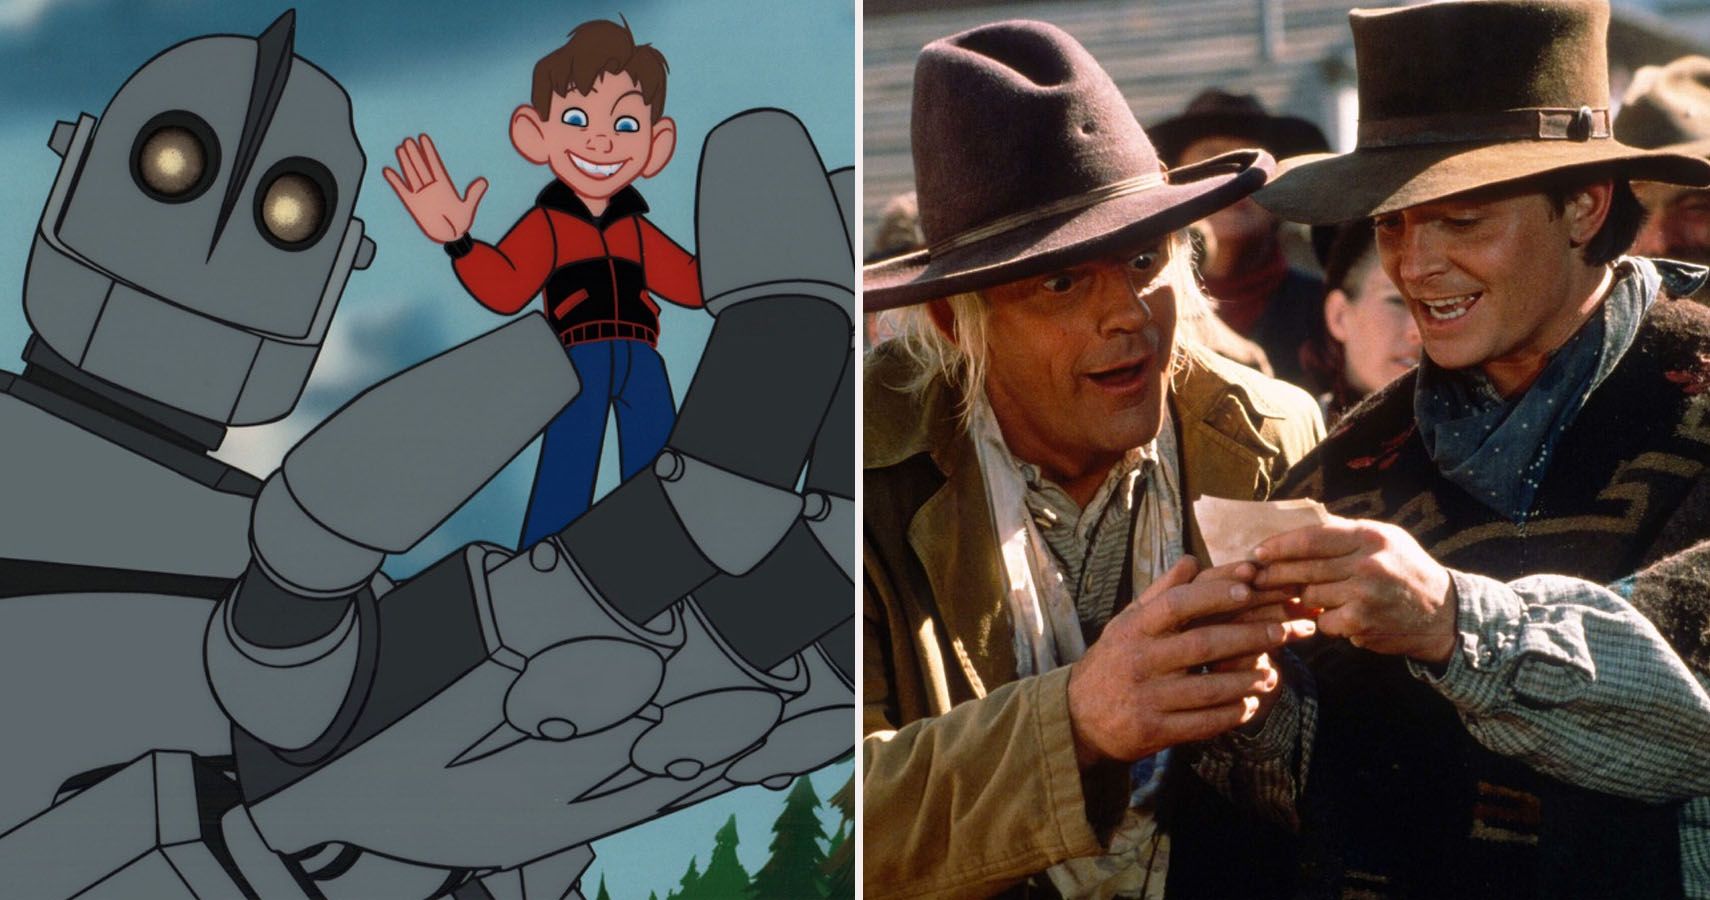 best 90s family movies on netflix